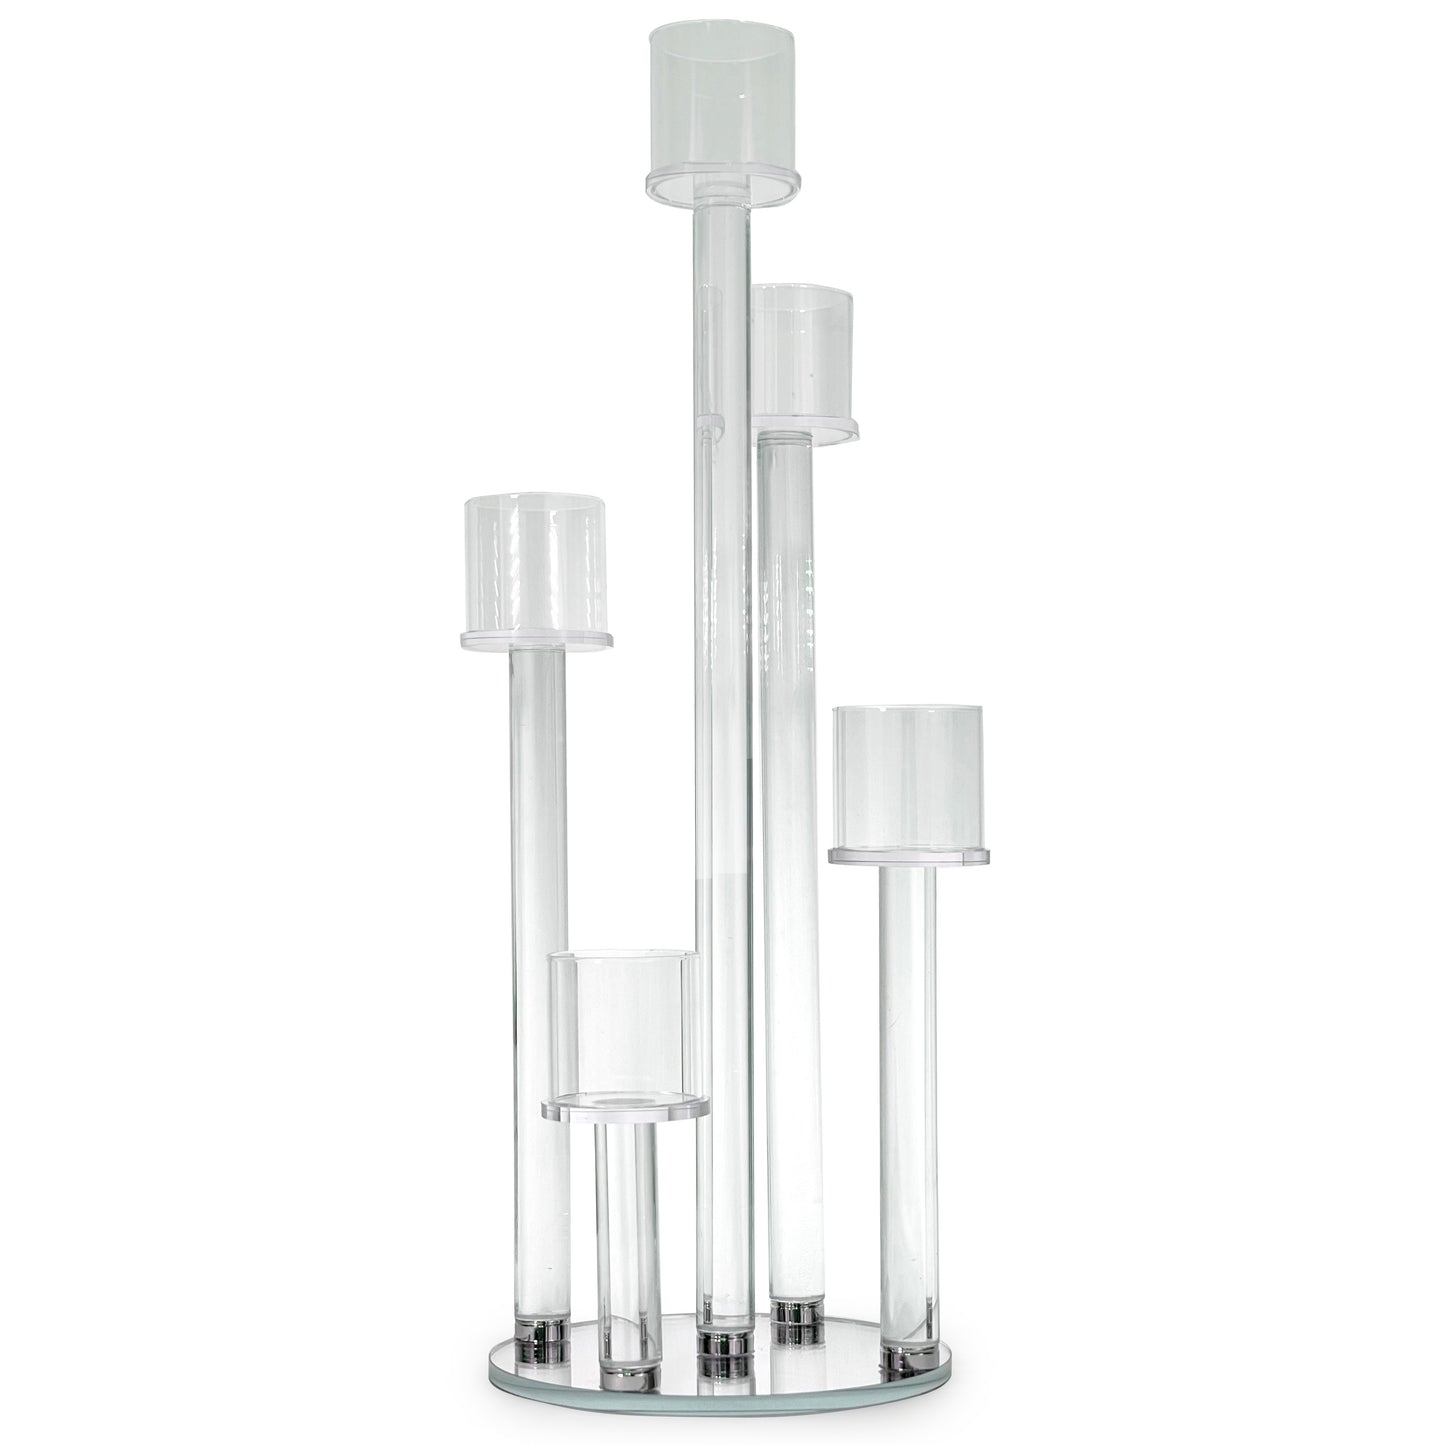 Allgala Candelabra 23" (58CM) Tall 5-Cup Crystal Solid Glass Tube Rod Supported Votive Candelabra-HD89128